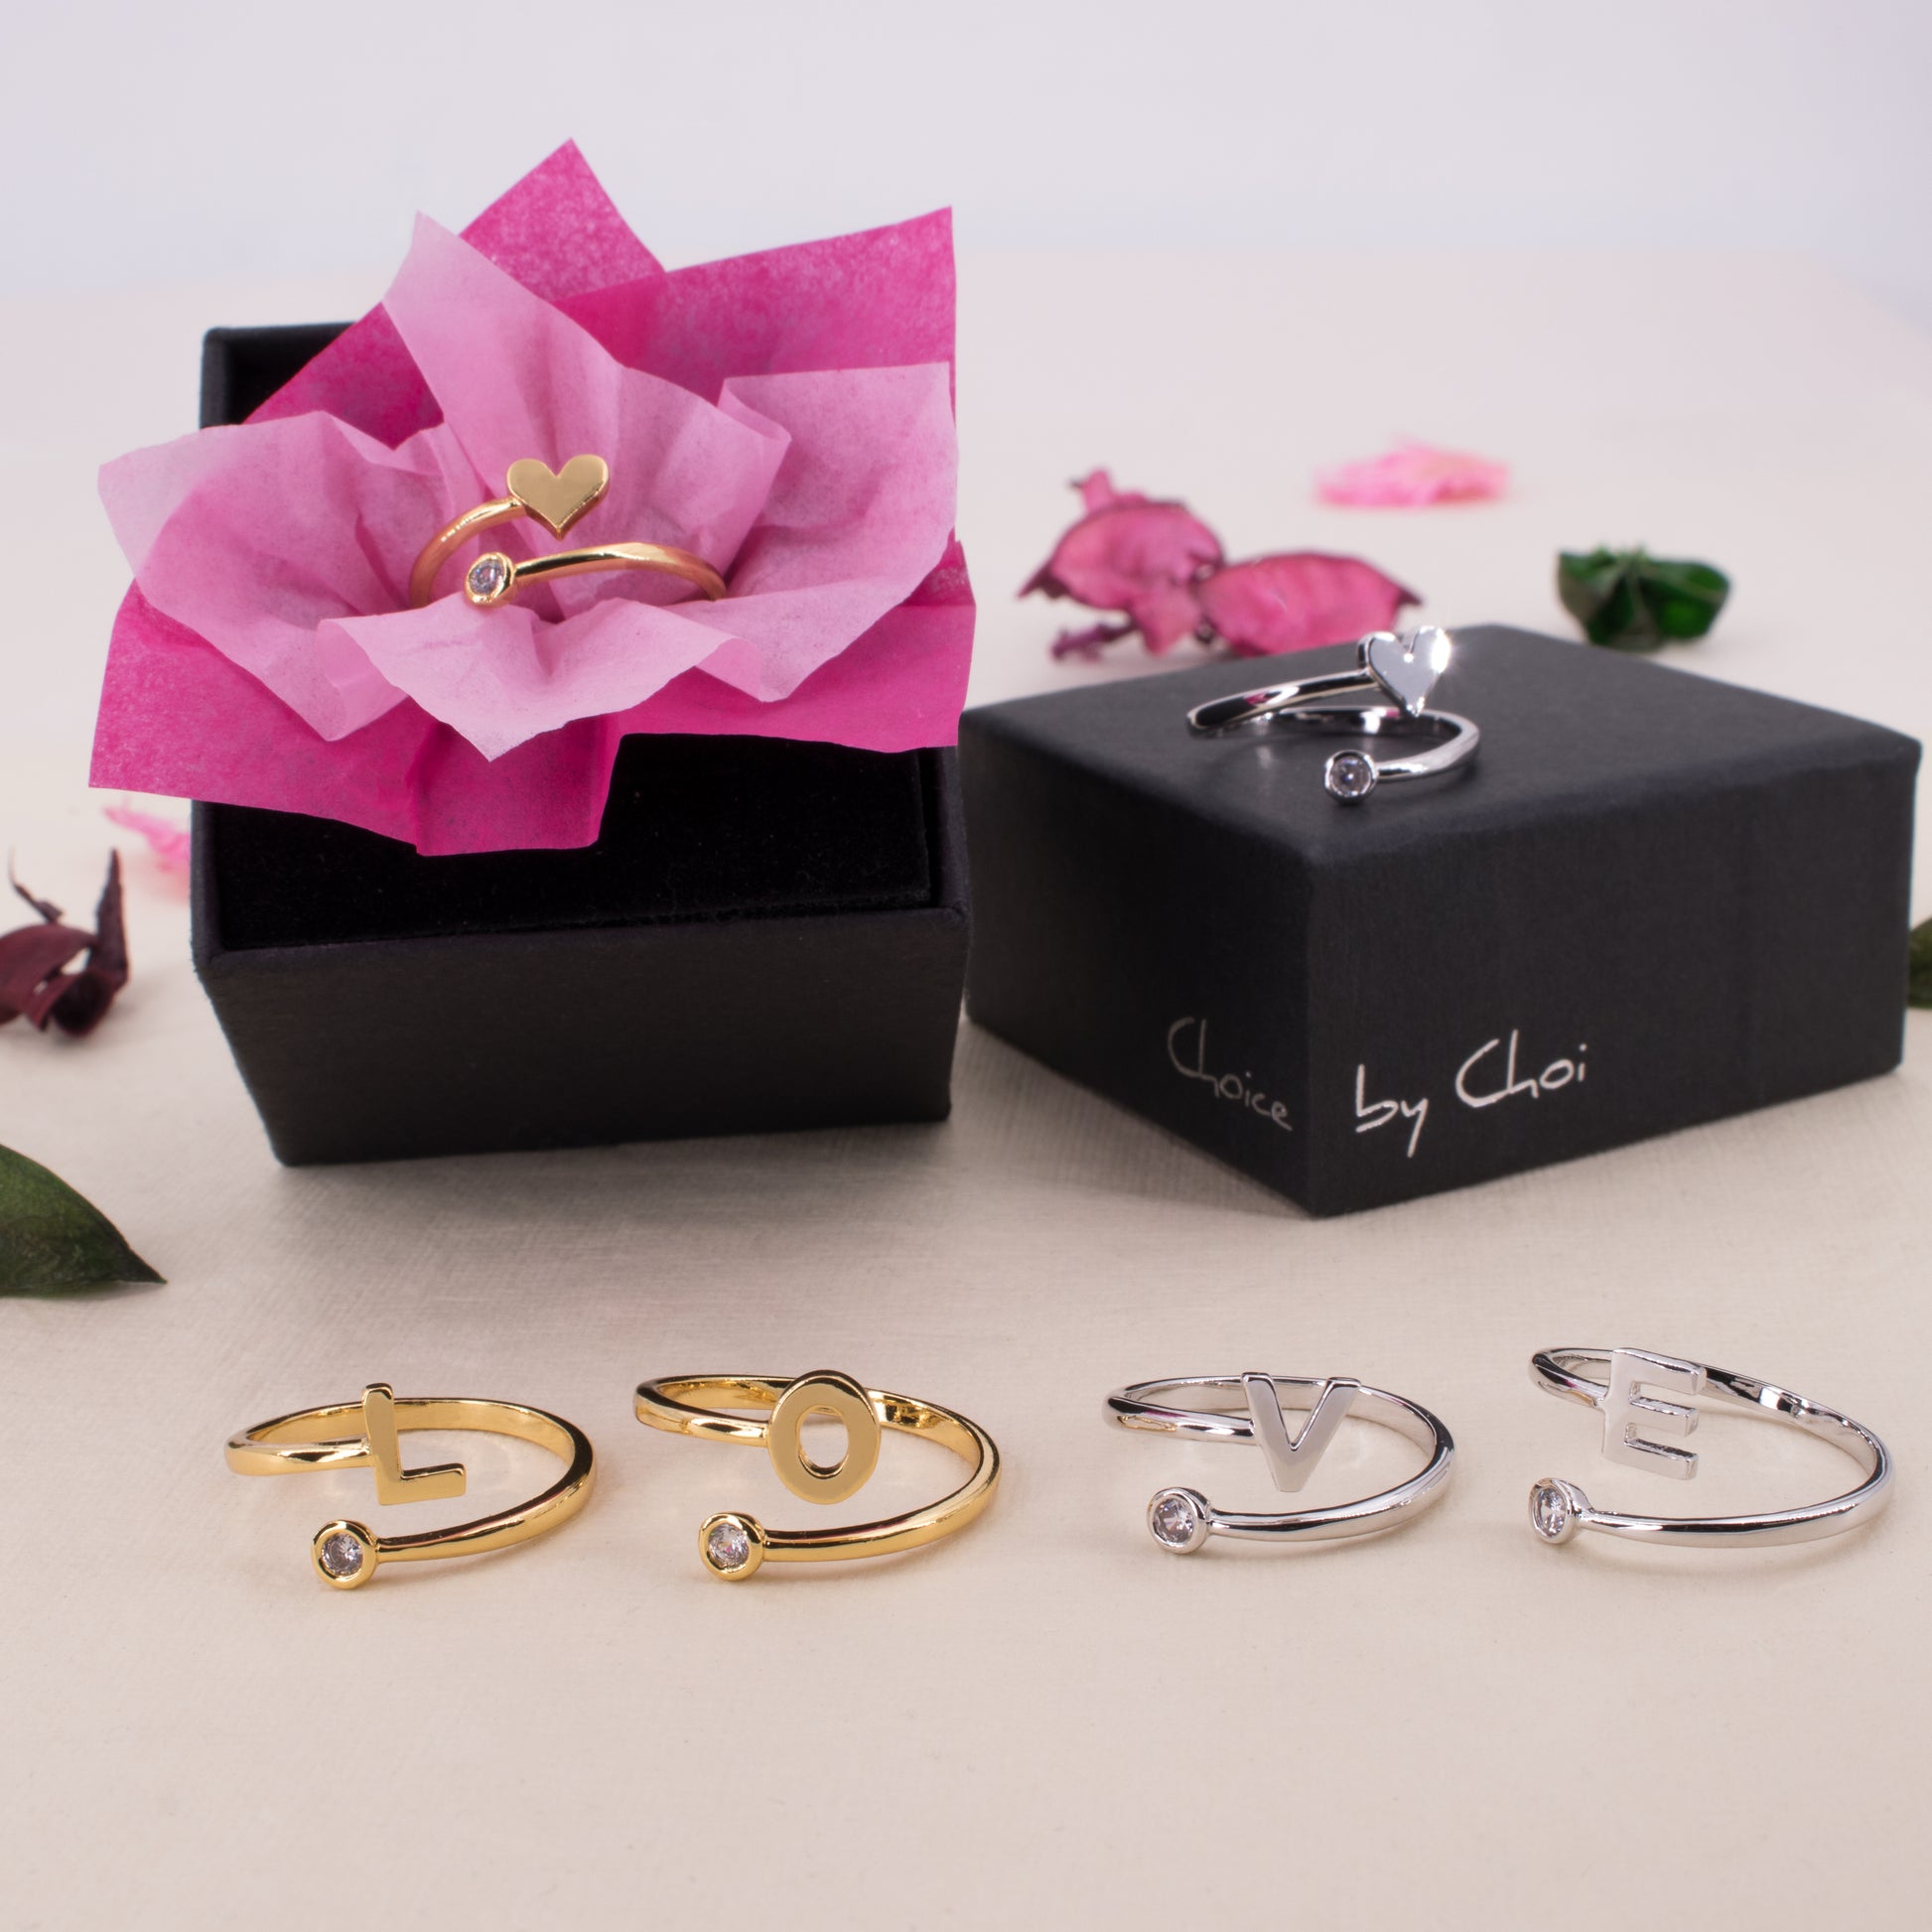 adjustable zirconia rings in, out and in front of boxes with flower petals in background